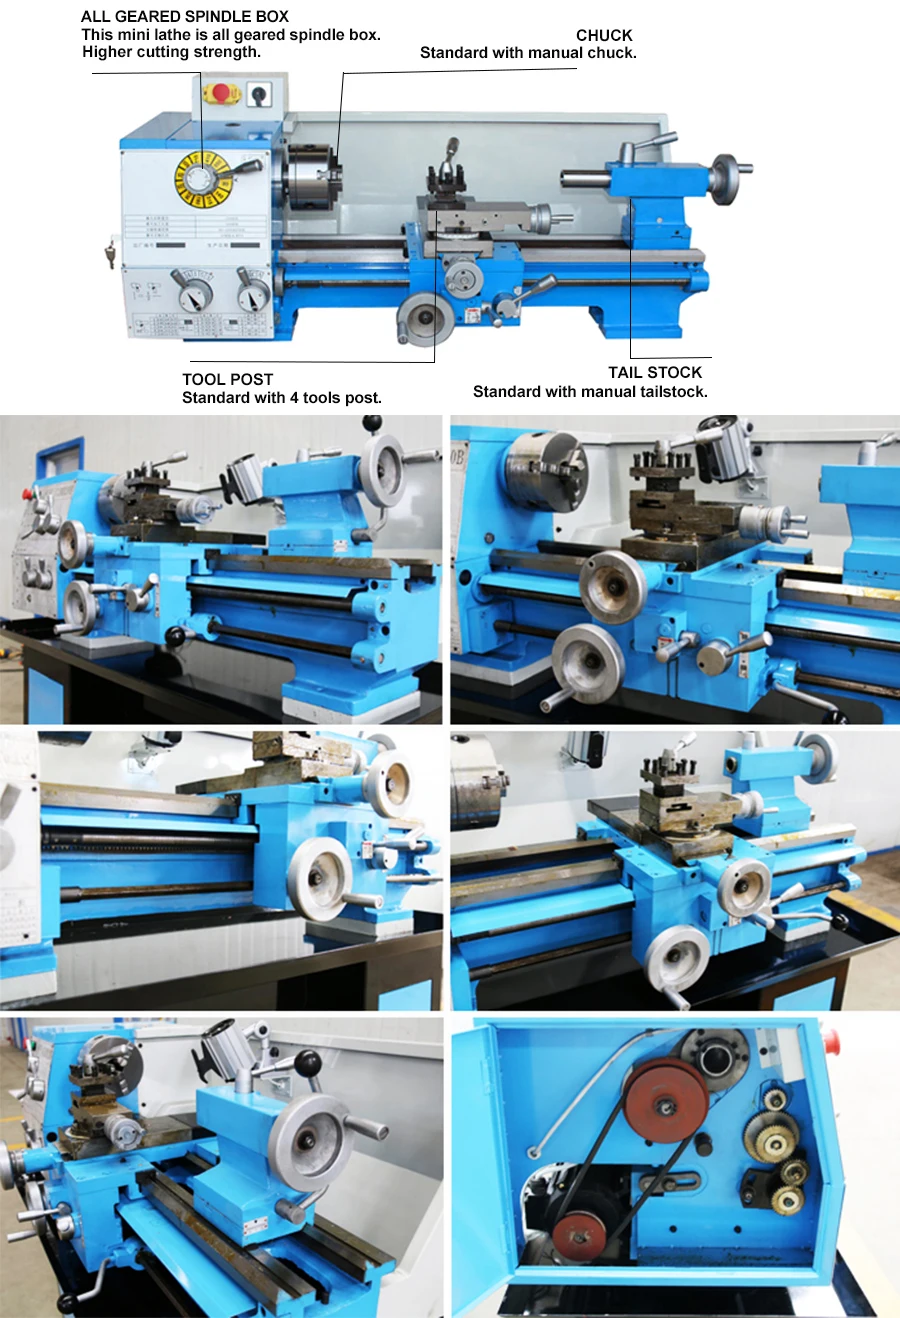 Mini hobby bench lathe machine with variable speed for metal turning